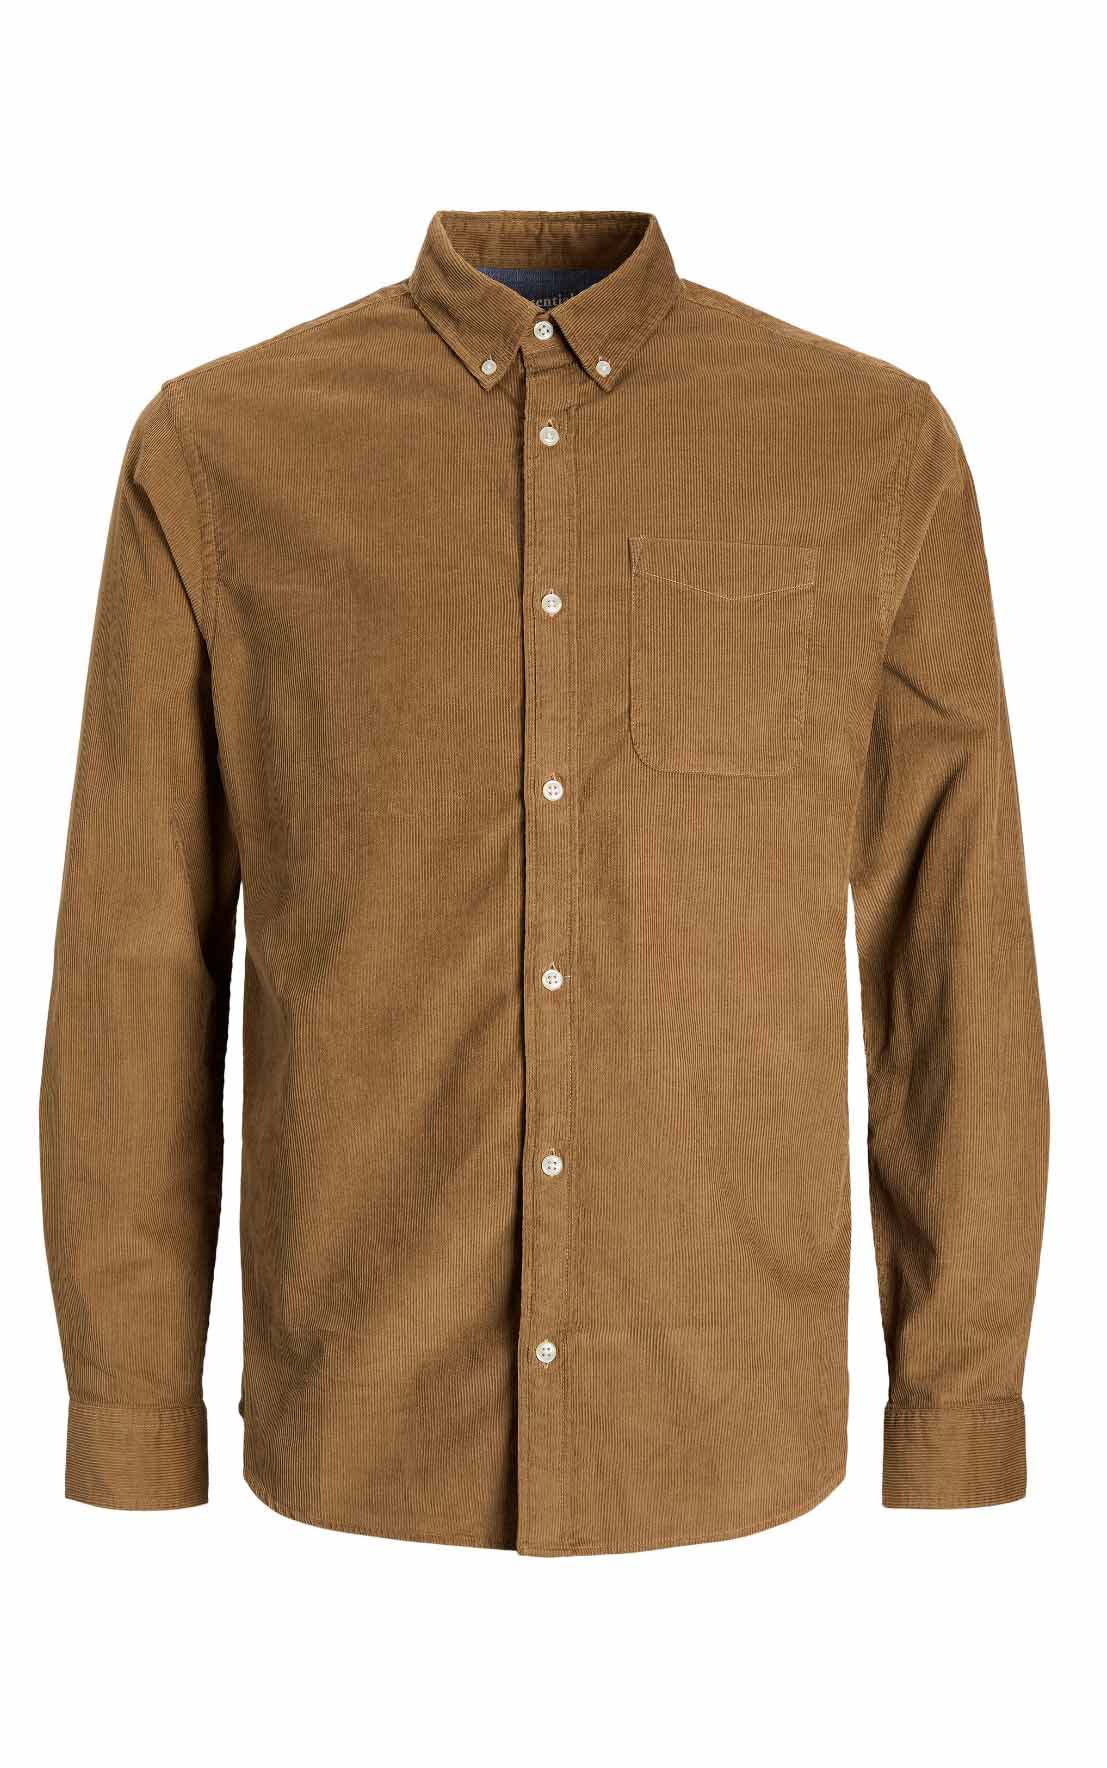 Classic Cord Long Sleeve in Otter